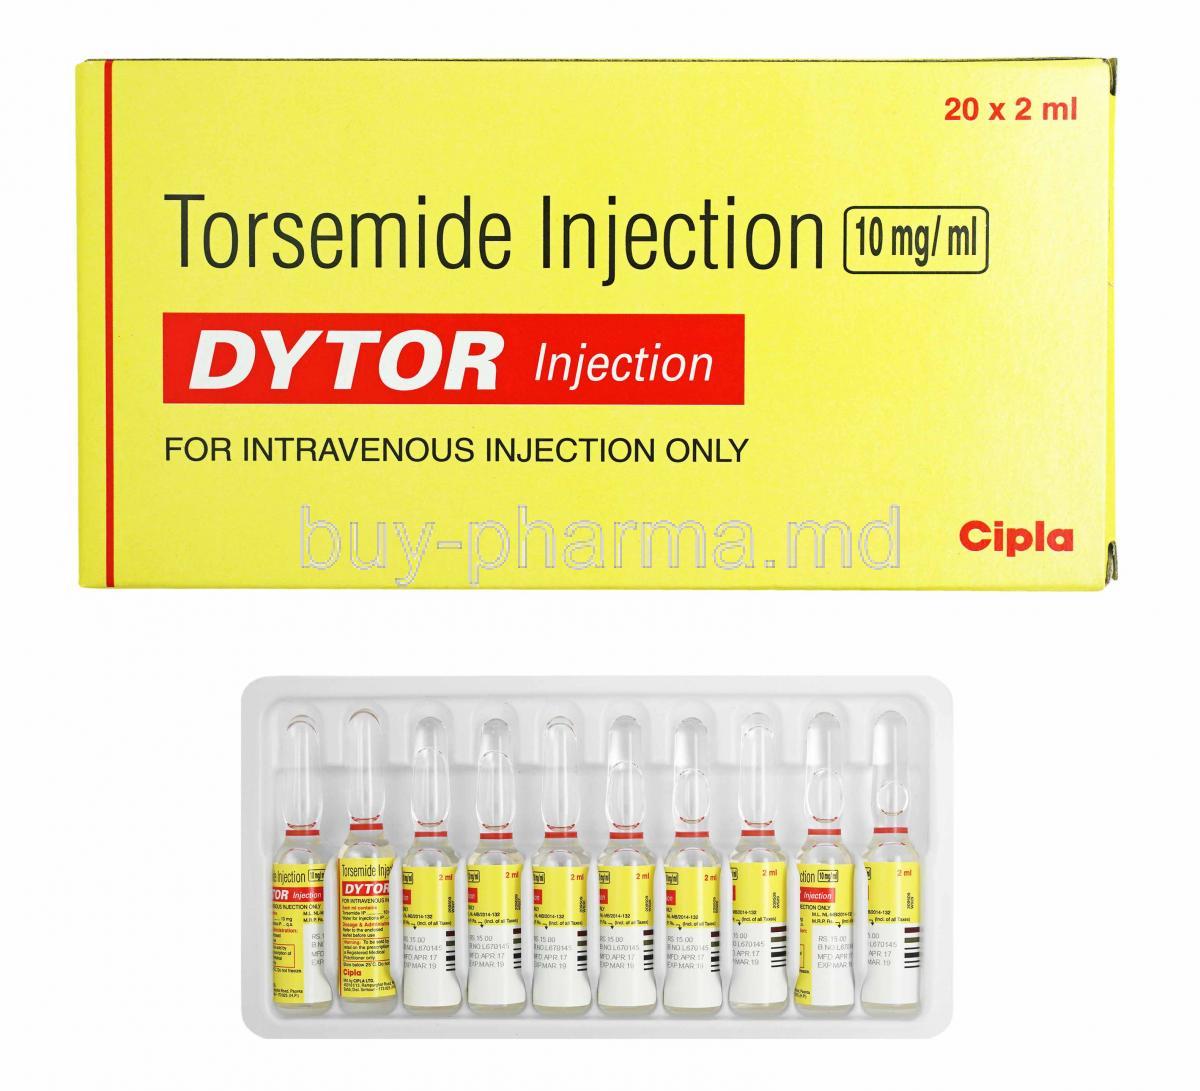 Dytor Injection, Torsemide box and ampoules